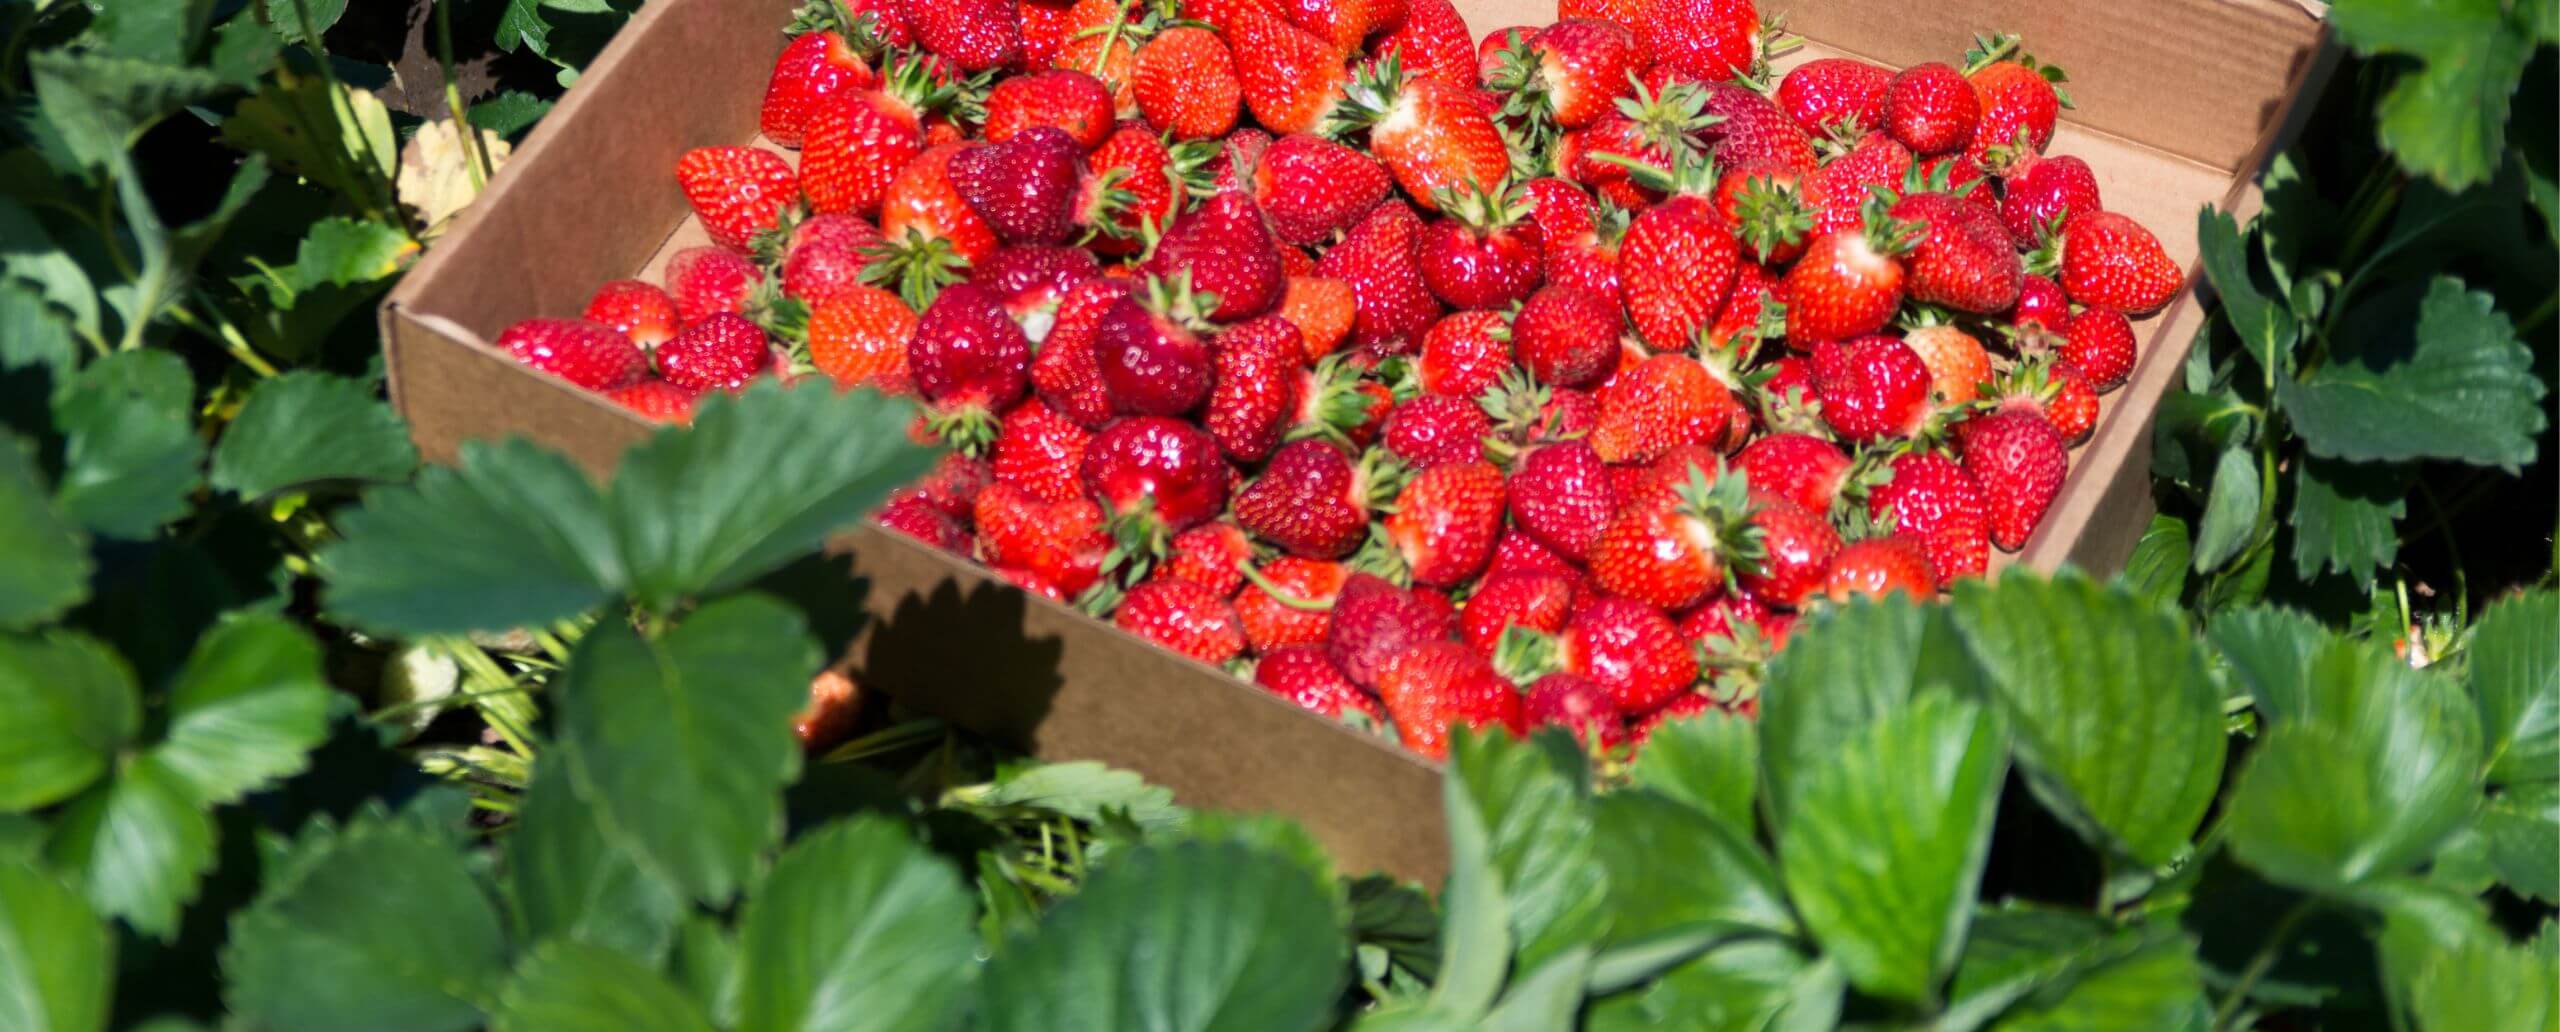 Strawberry Picking CT Local Pick Your Own Strawberries Lyman Orchards